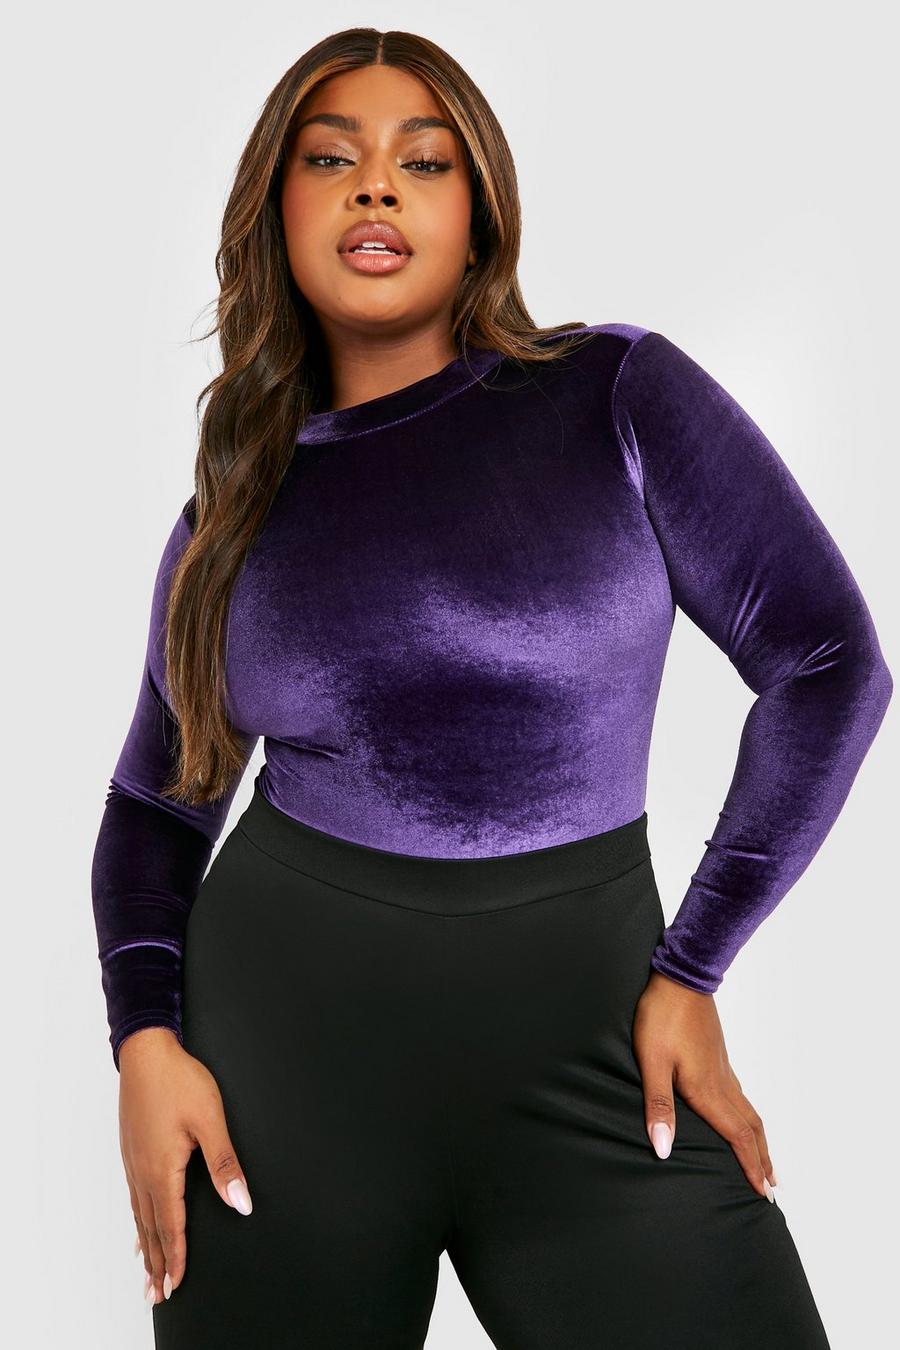 Clearance Clothes Under $5.00 ! BVnarty Women's Top Knit Pocket